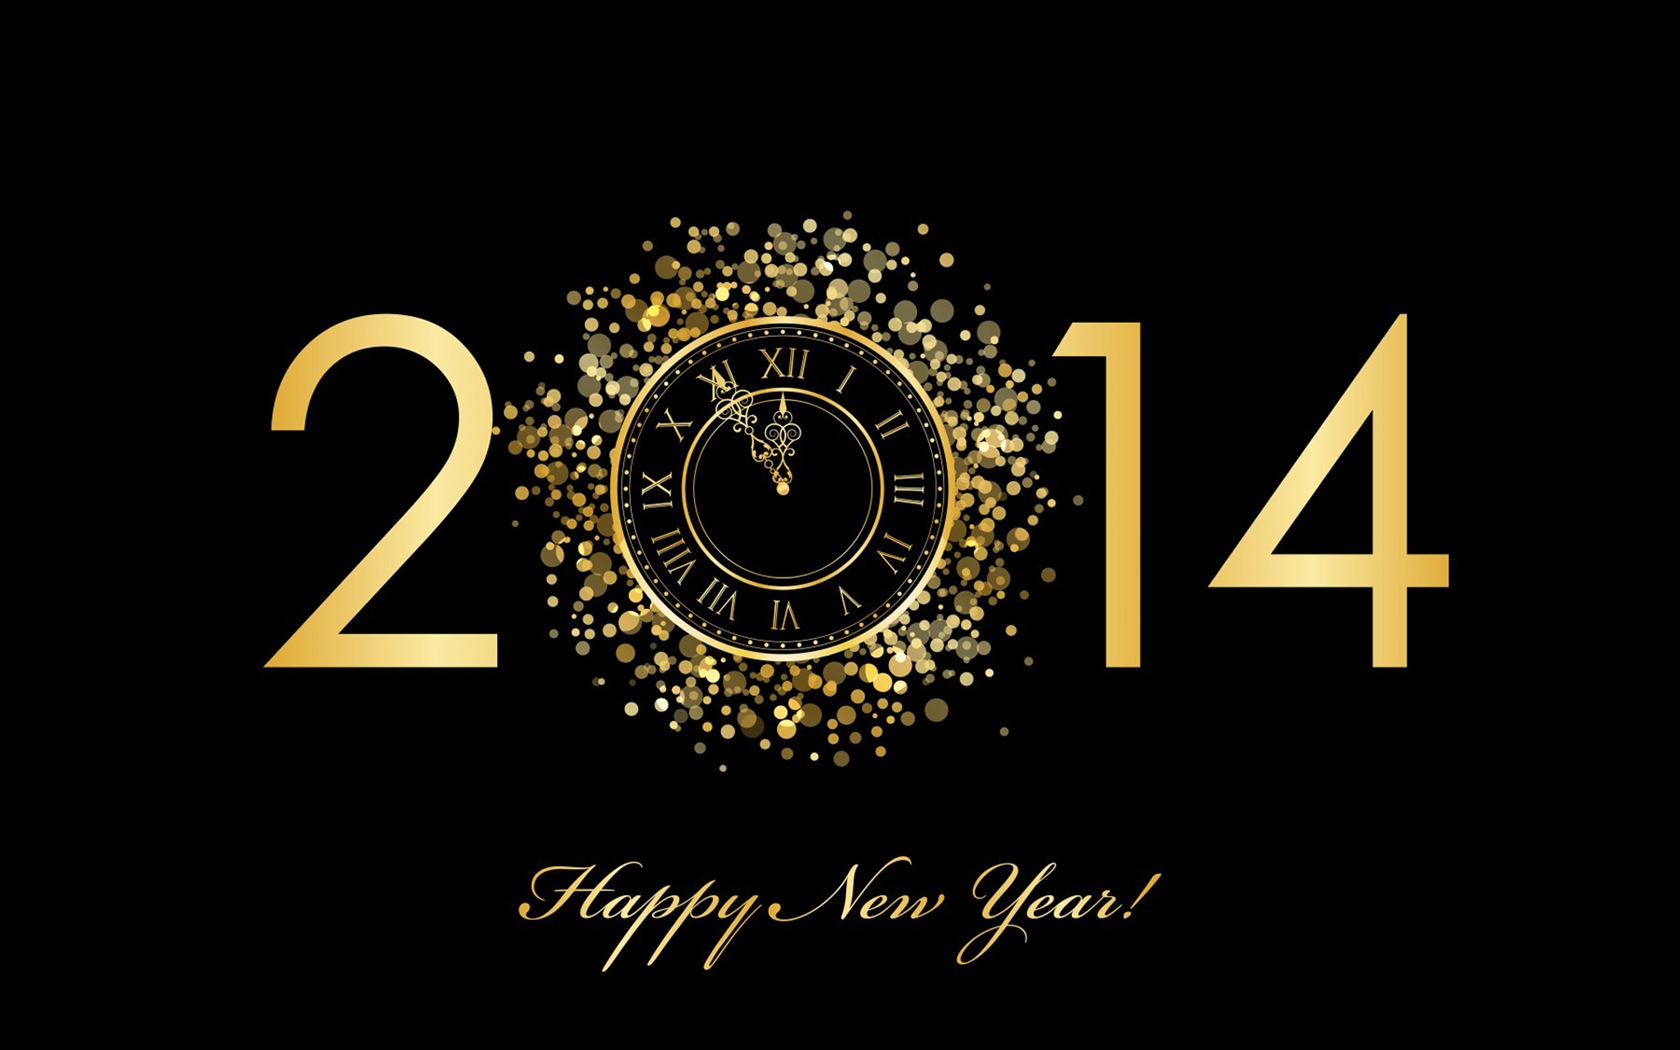 2014 New Year Theme HD Wallpapers (1) #1 - 1680x1050